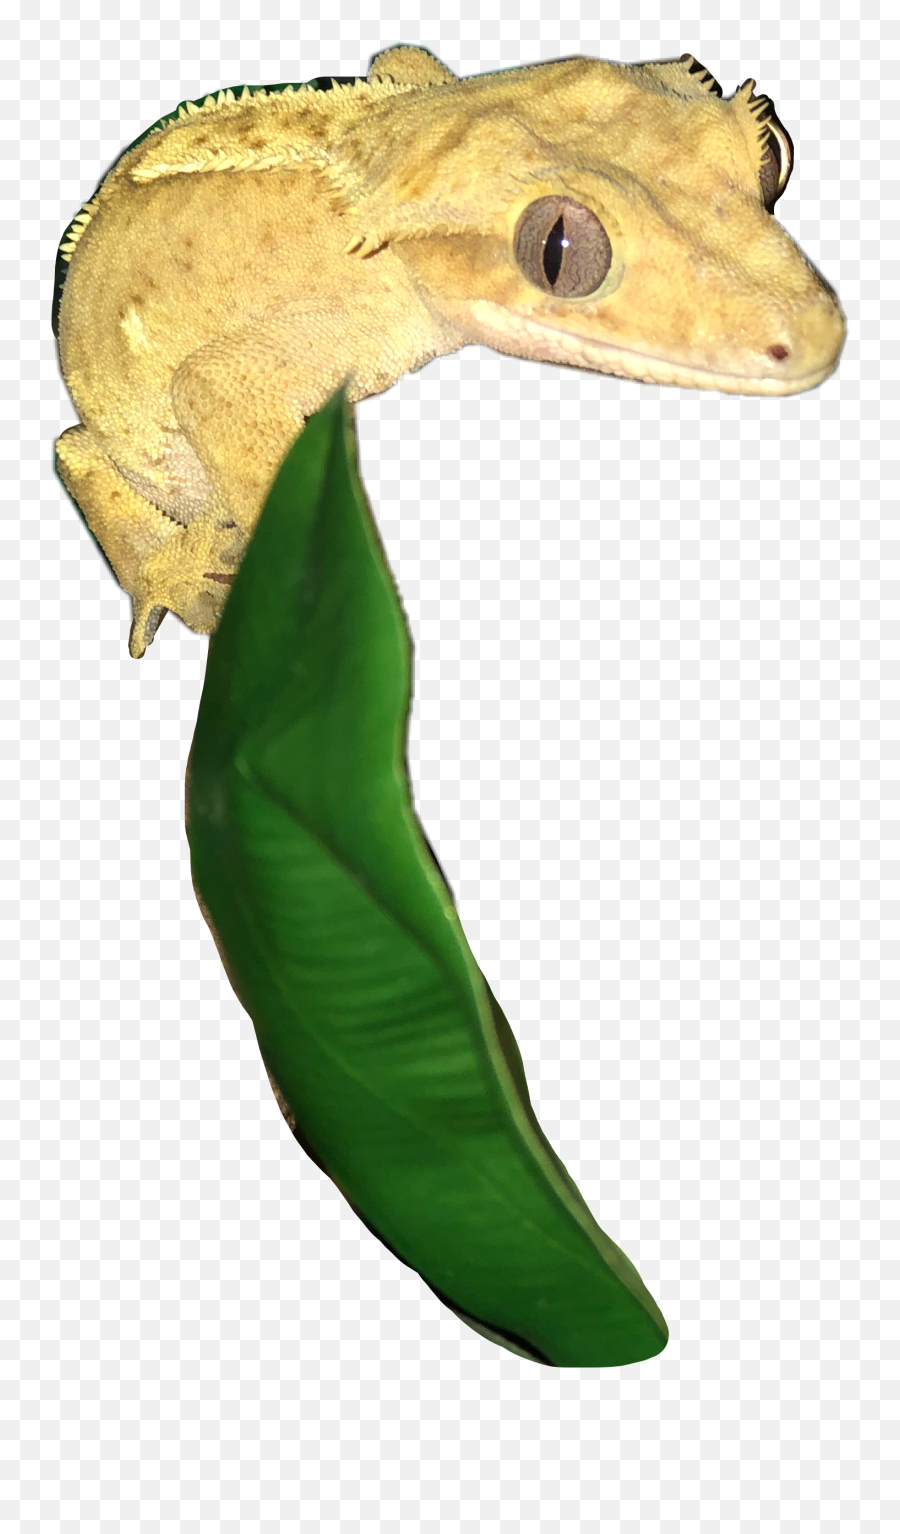 The Most Edited Crestedgecko Picsart - Amphibians Emoji,What Does Color Say About Crested Geckos Emotion